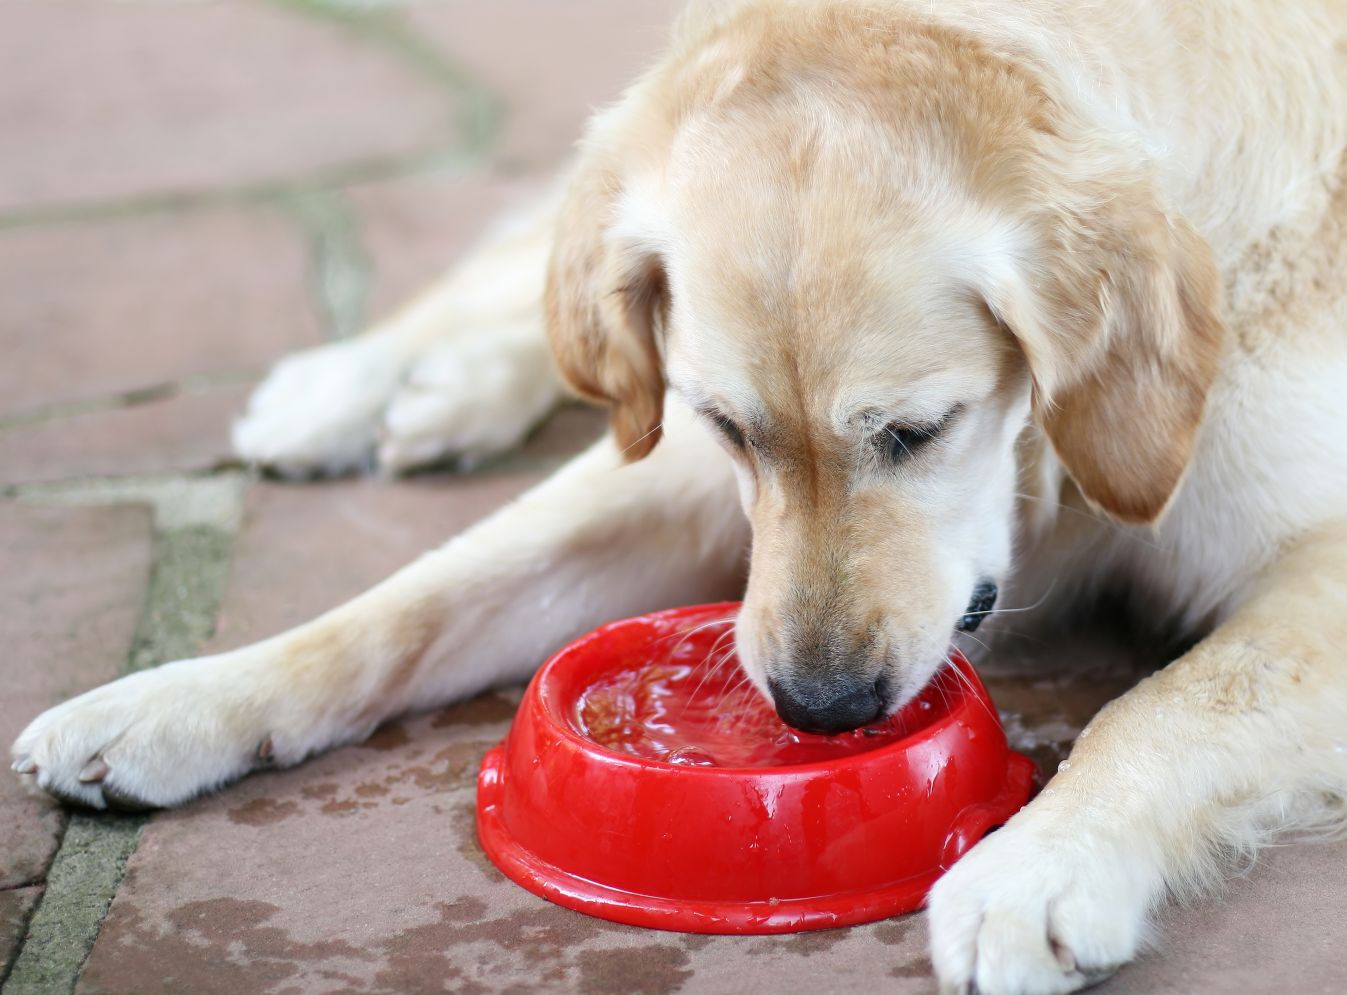 A dog drinks out of a water bowl.